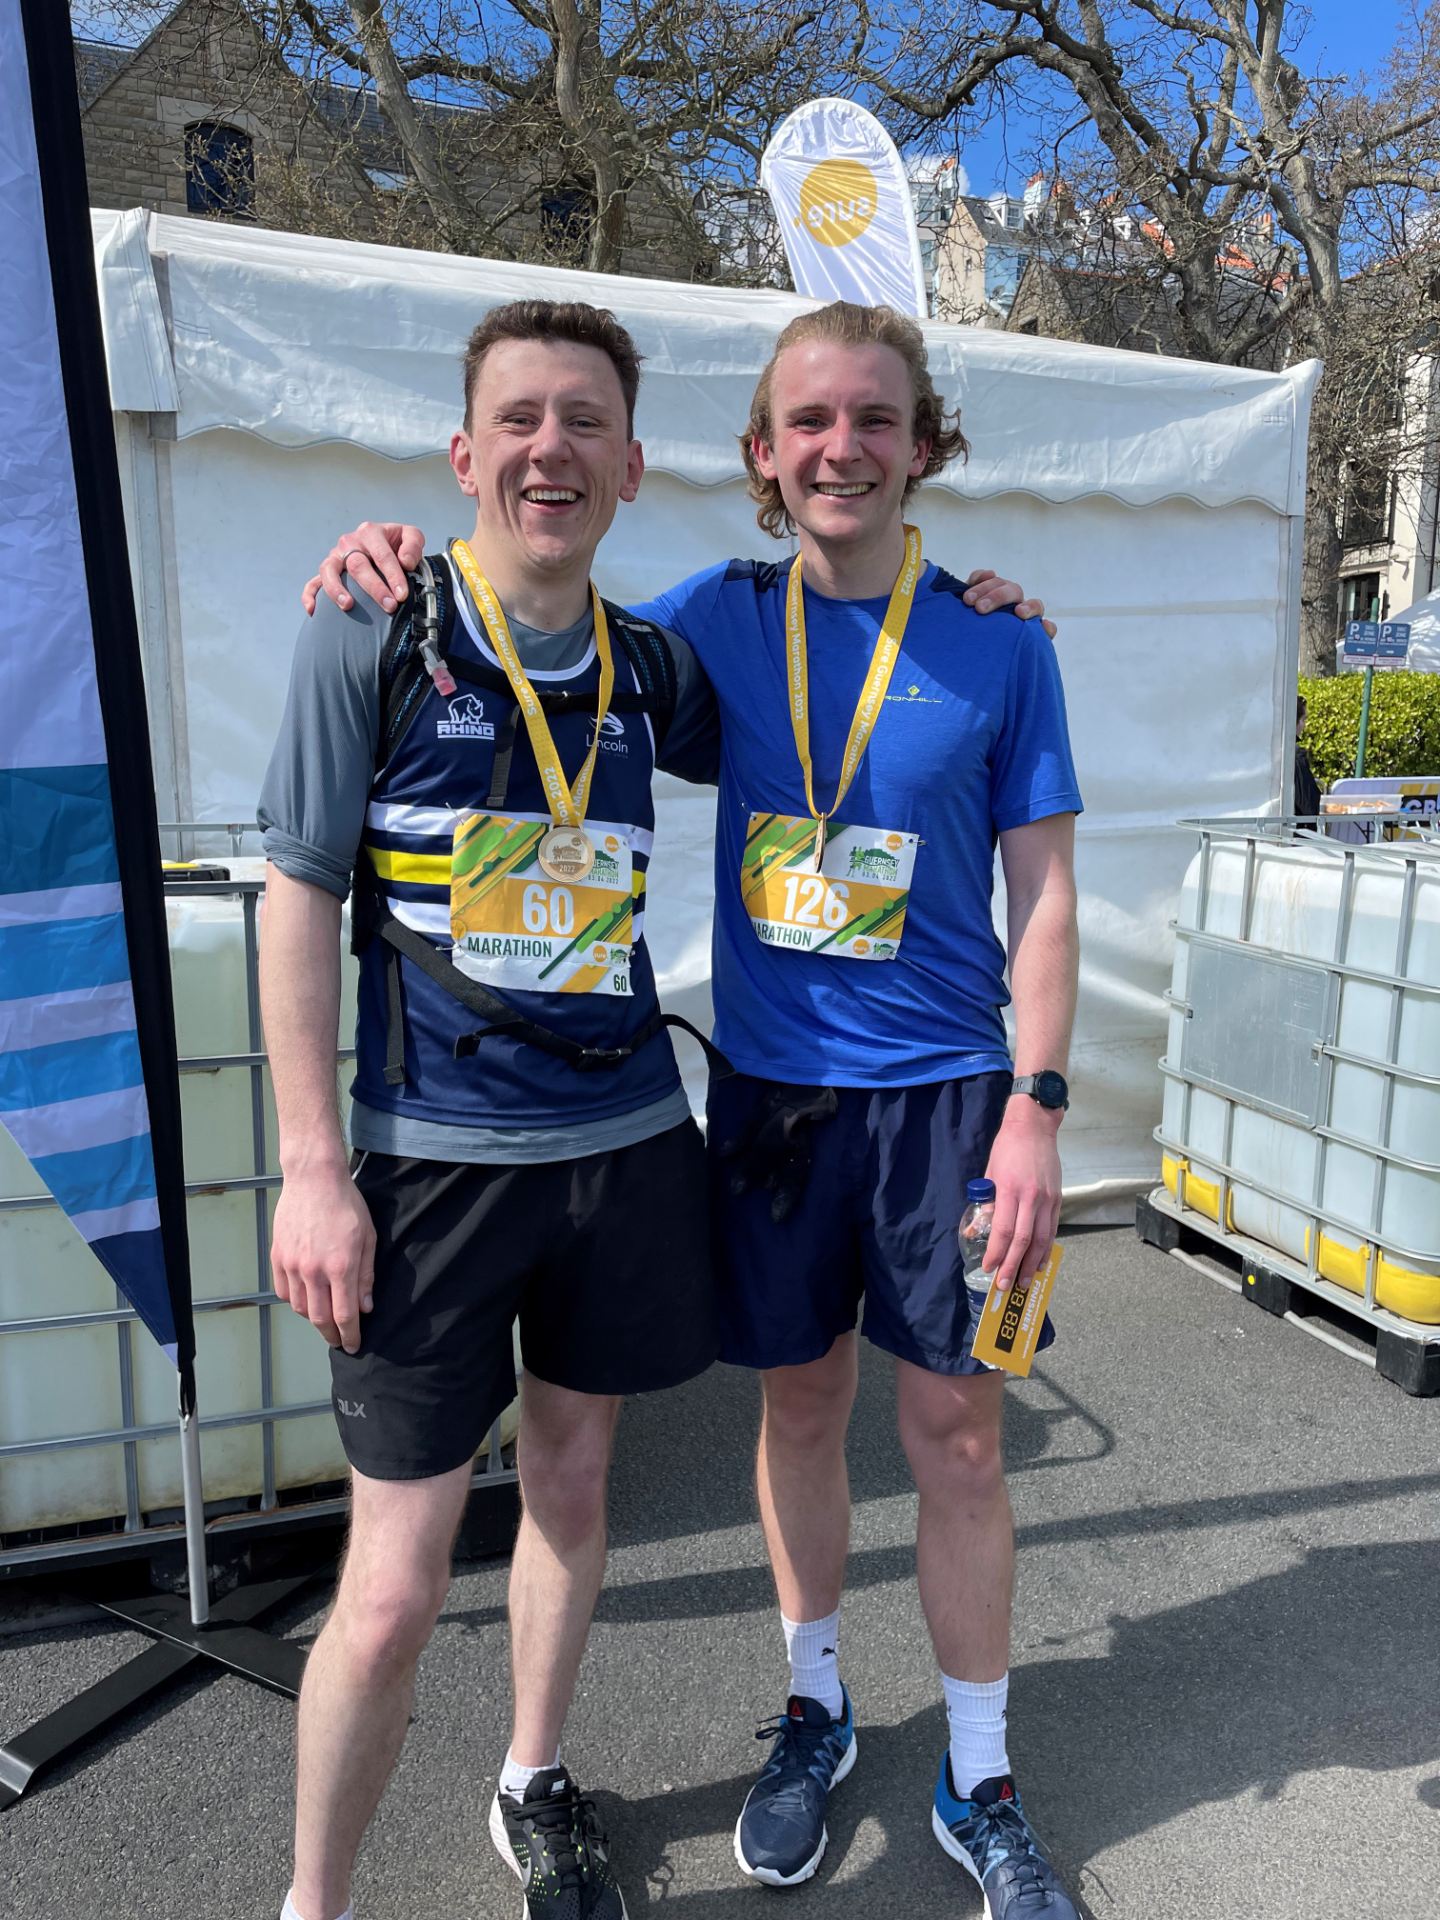 Lewis and James at the marathon